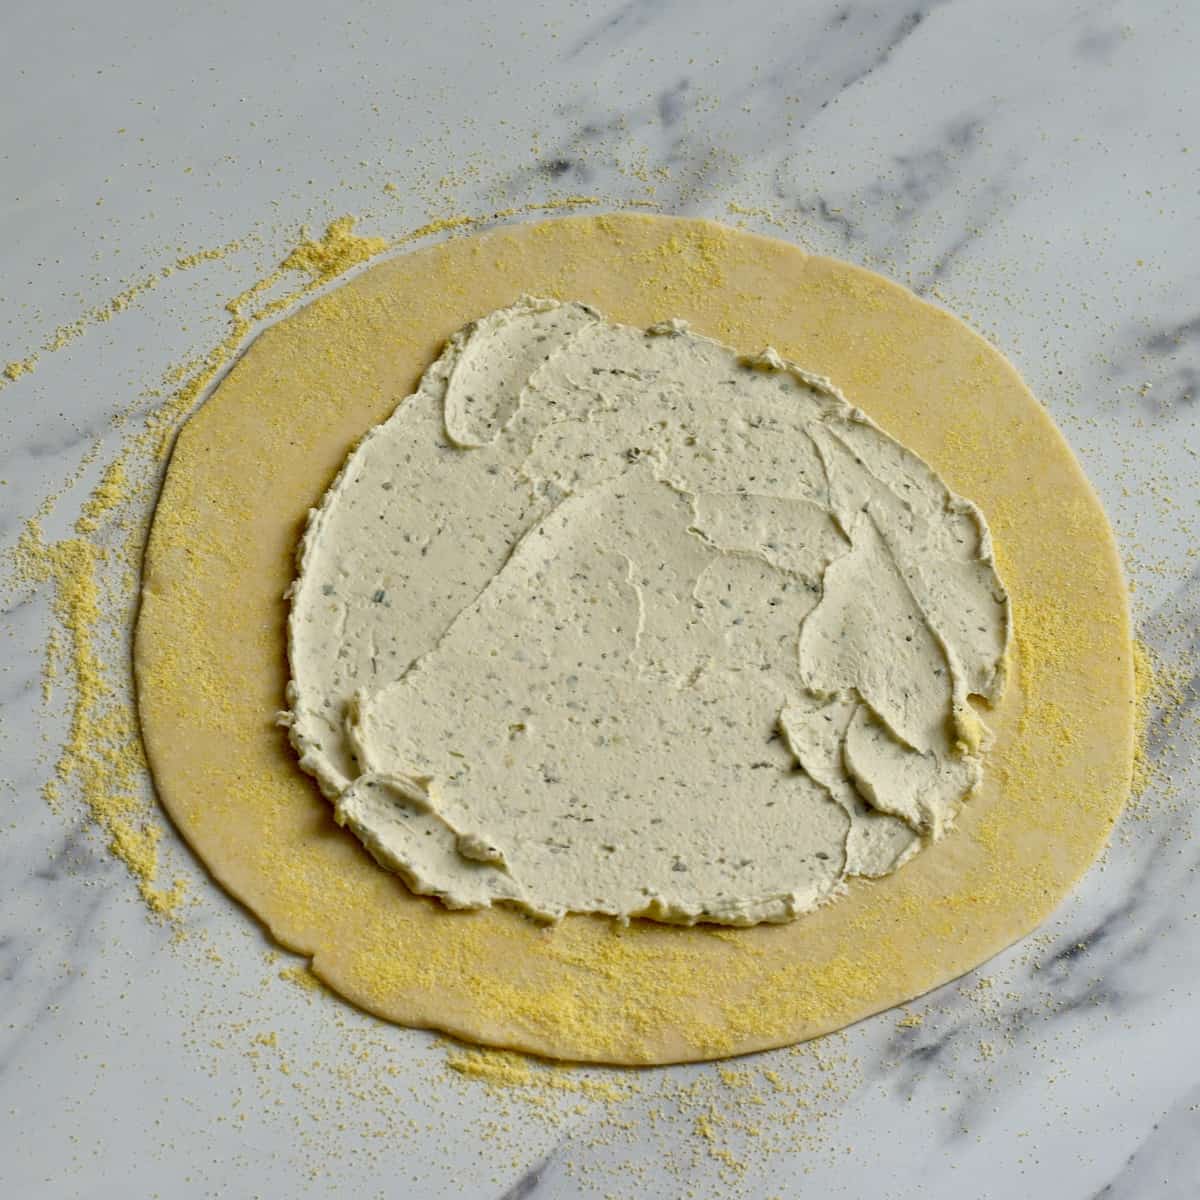 Herbed cream cheese spread over most of flat pie crust on marble surface.